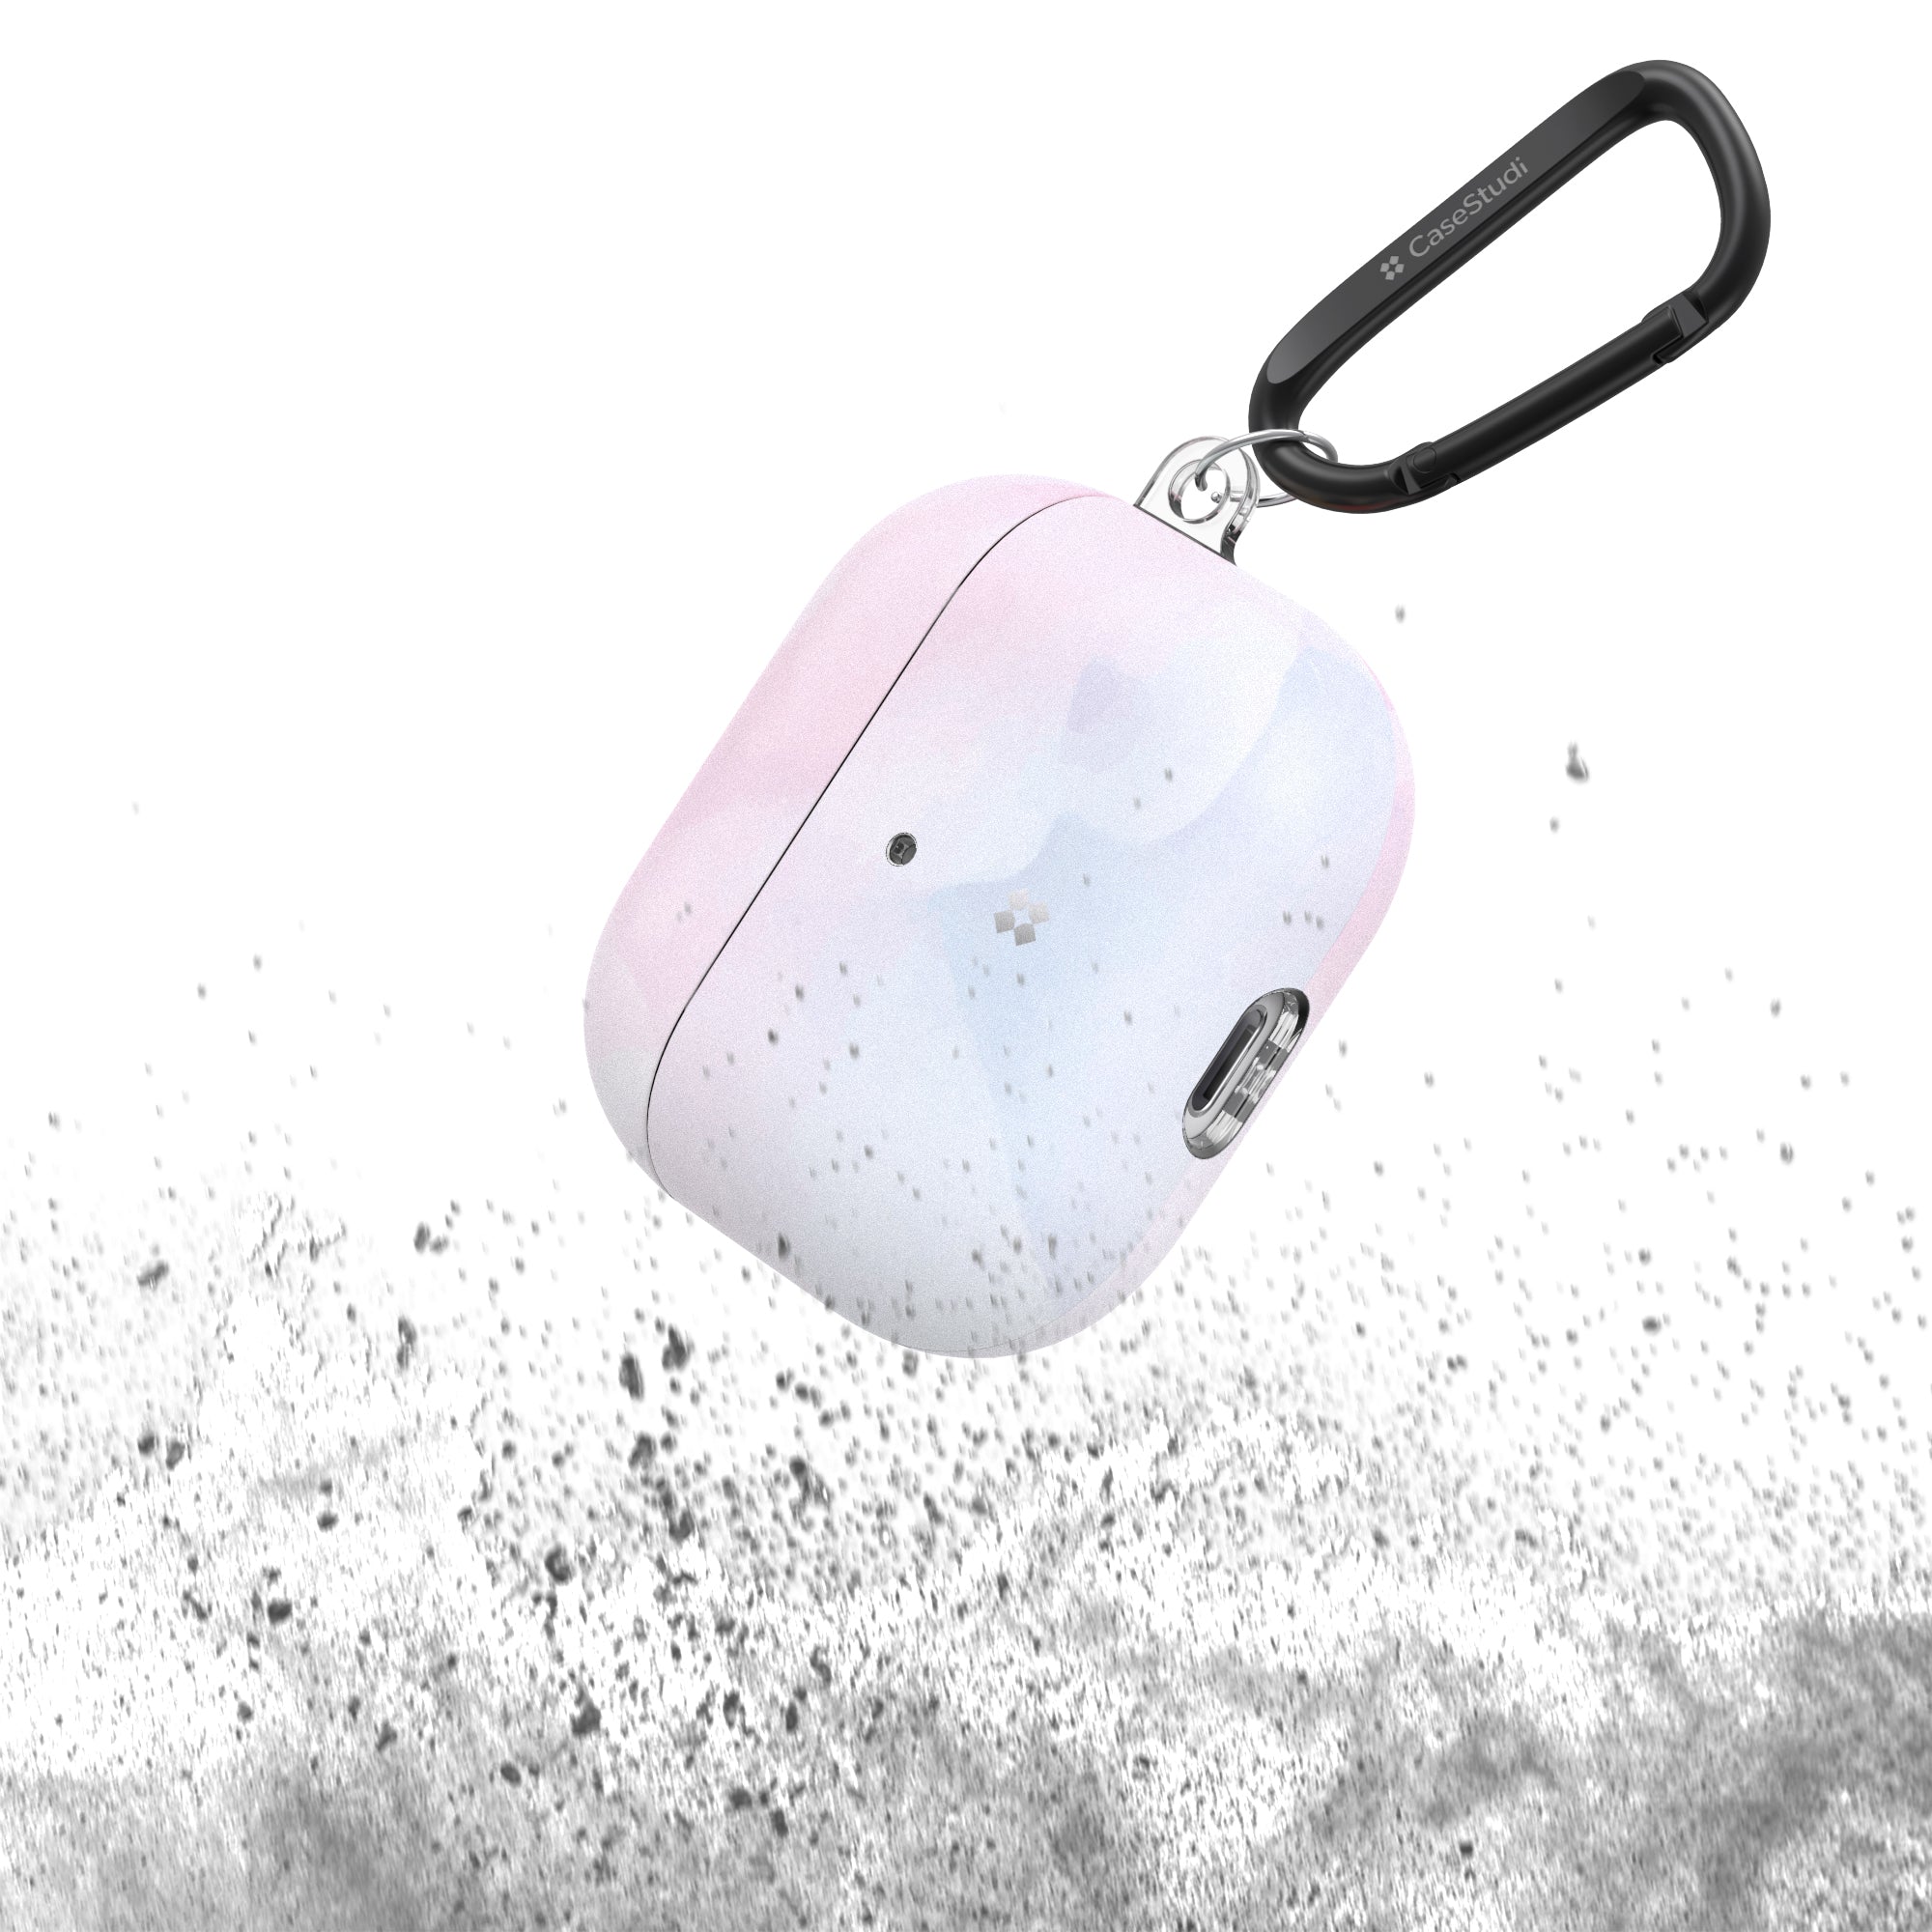 Prismart(S) is a Made of TPU which is durable enough for daily use. It protects the AirPods 3rd Generation from scratch, dust and shock.